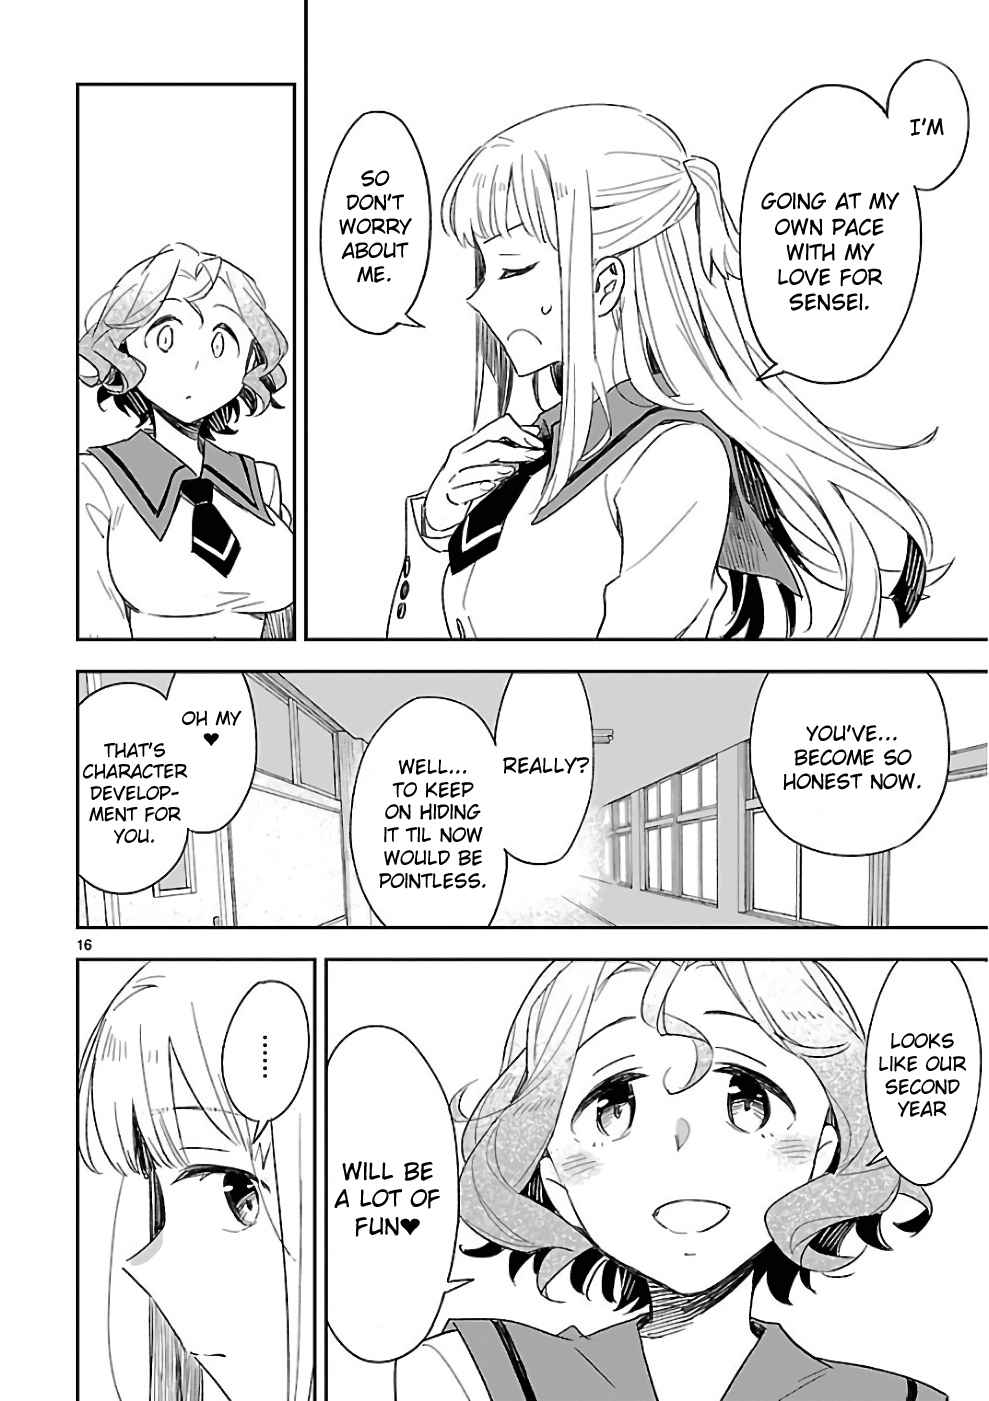 Omaera Zenin Mendokusai! Vol. 8 Ch. 38 You'll realize only when you actually put them into words